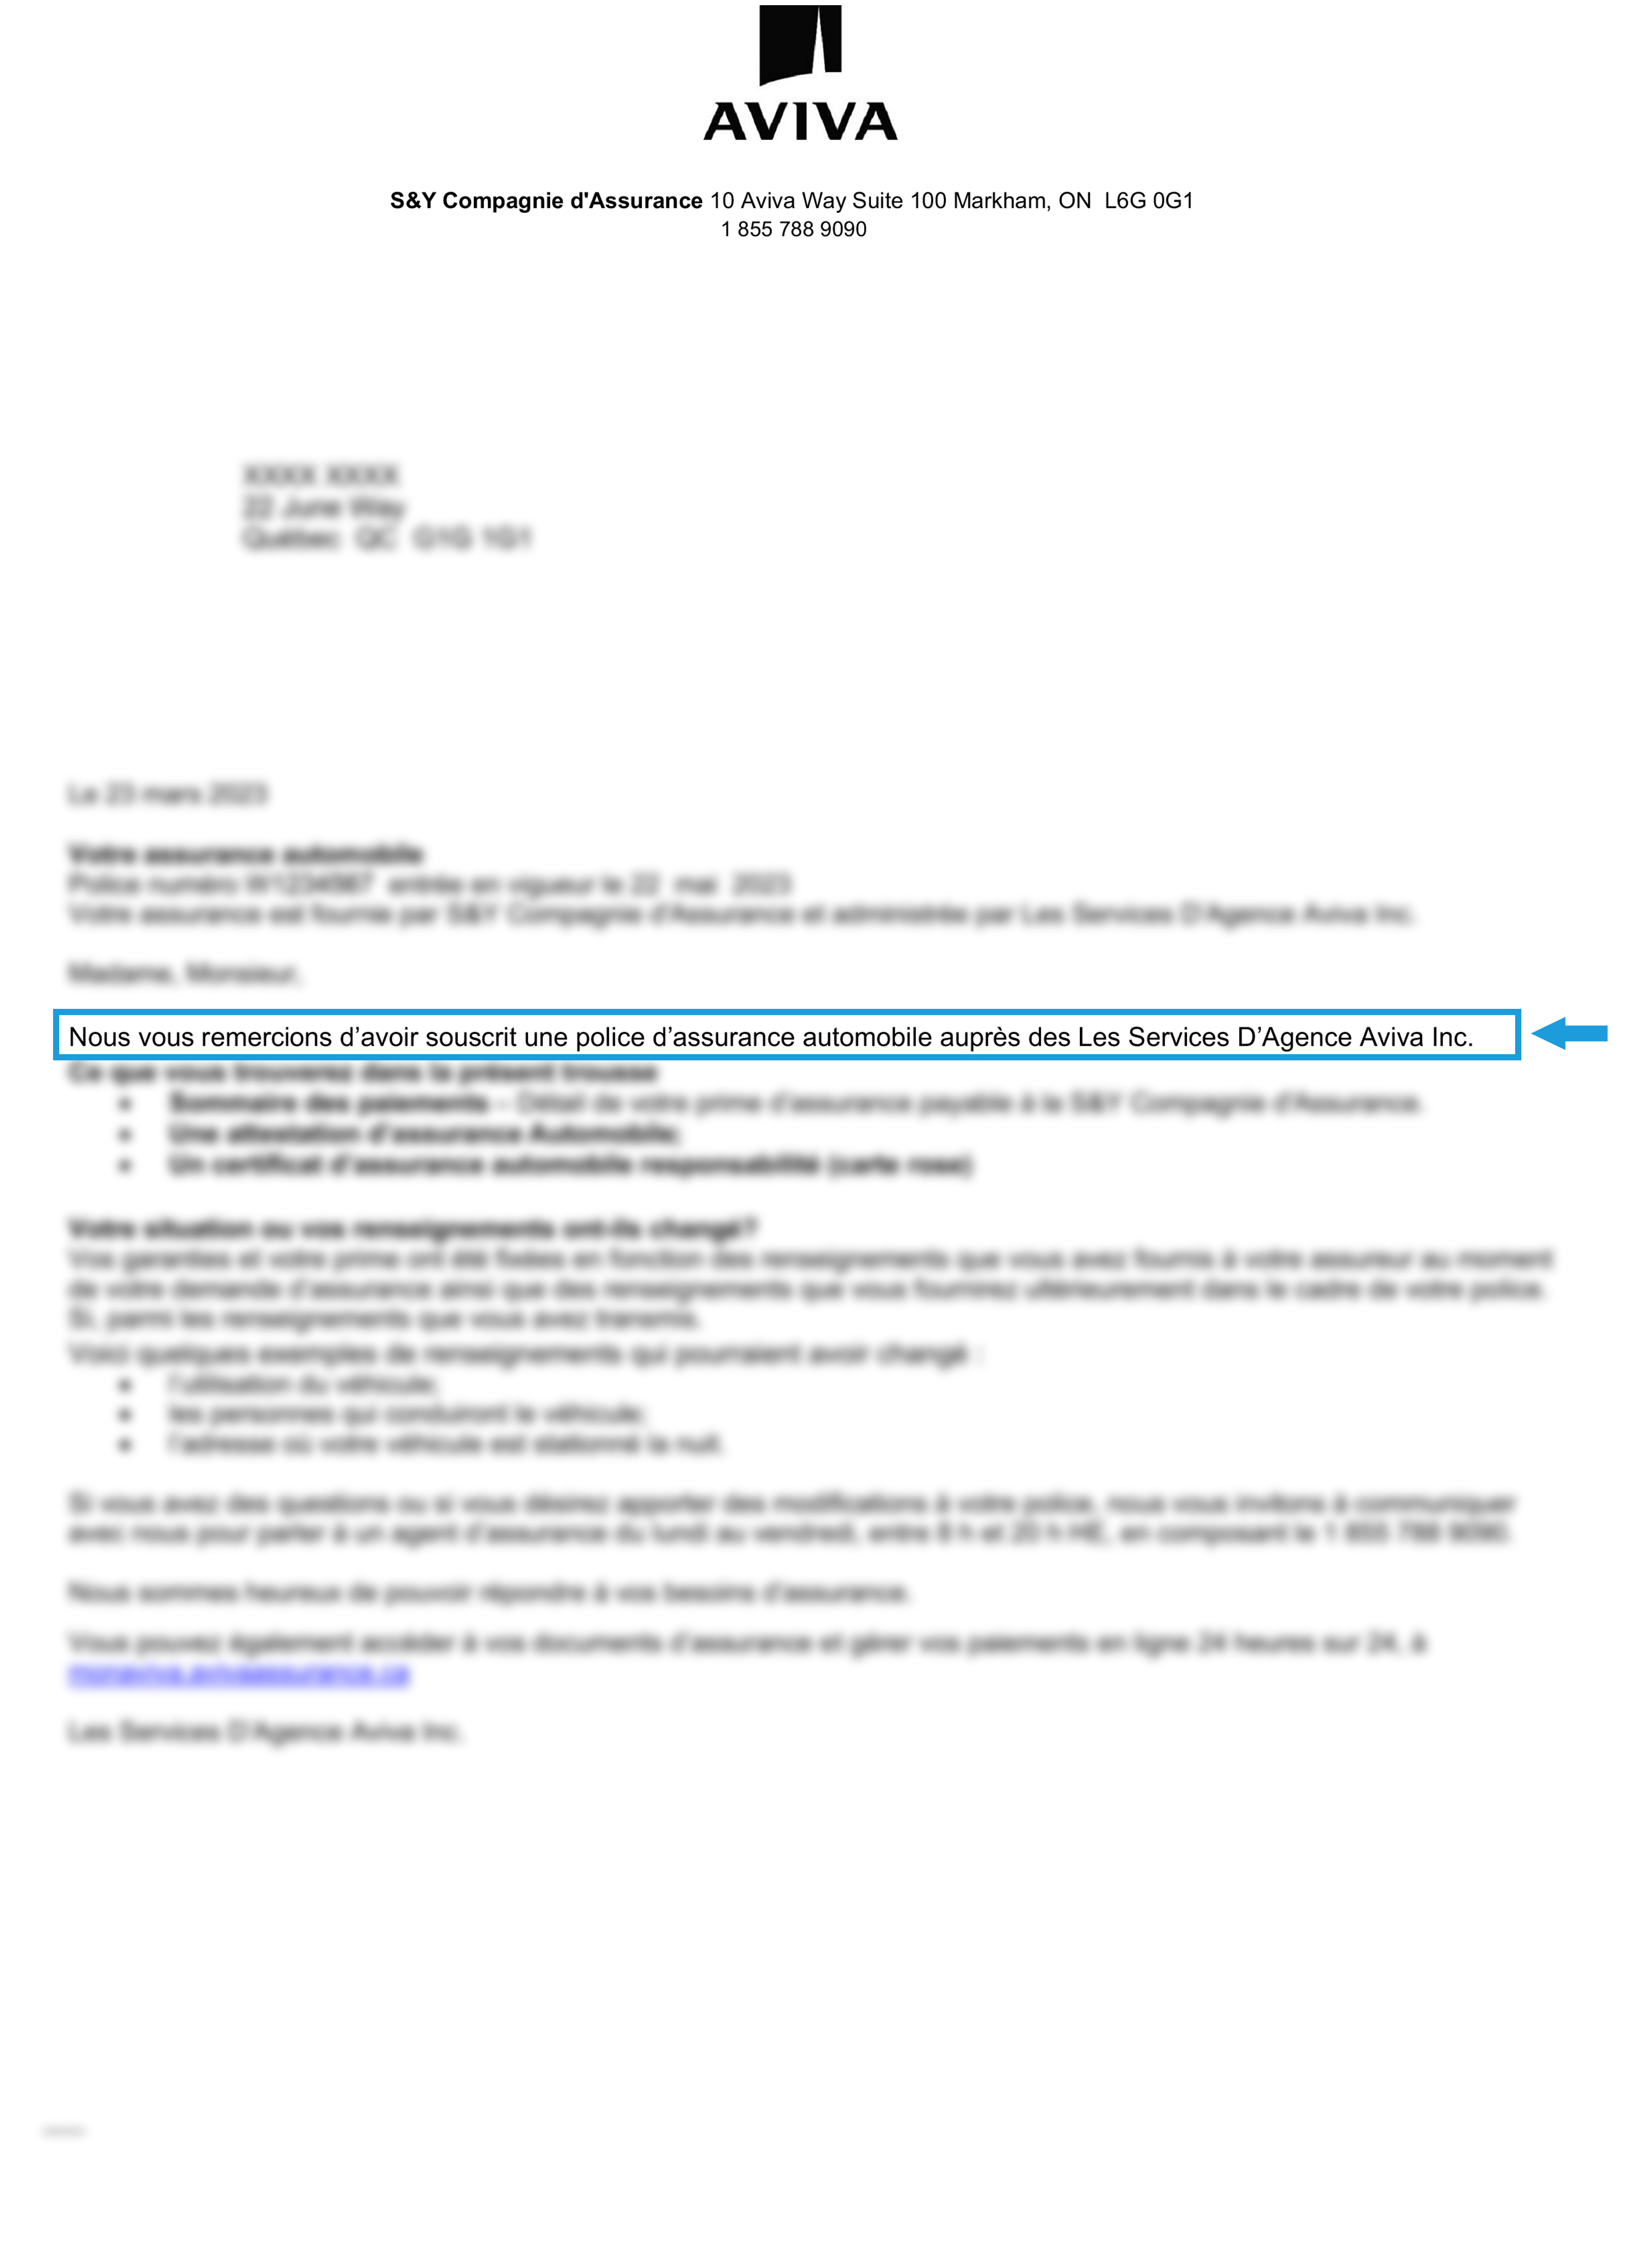 Blurred Aviva Direct policy document highlighting text: Your Insurance coverage is provided by S&Y Insurance Company, serviced by Aviva Agency Services Inc.